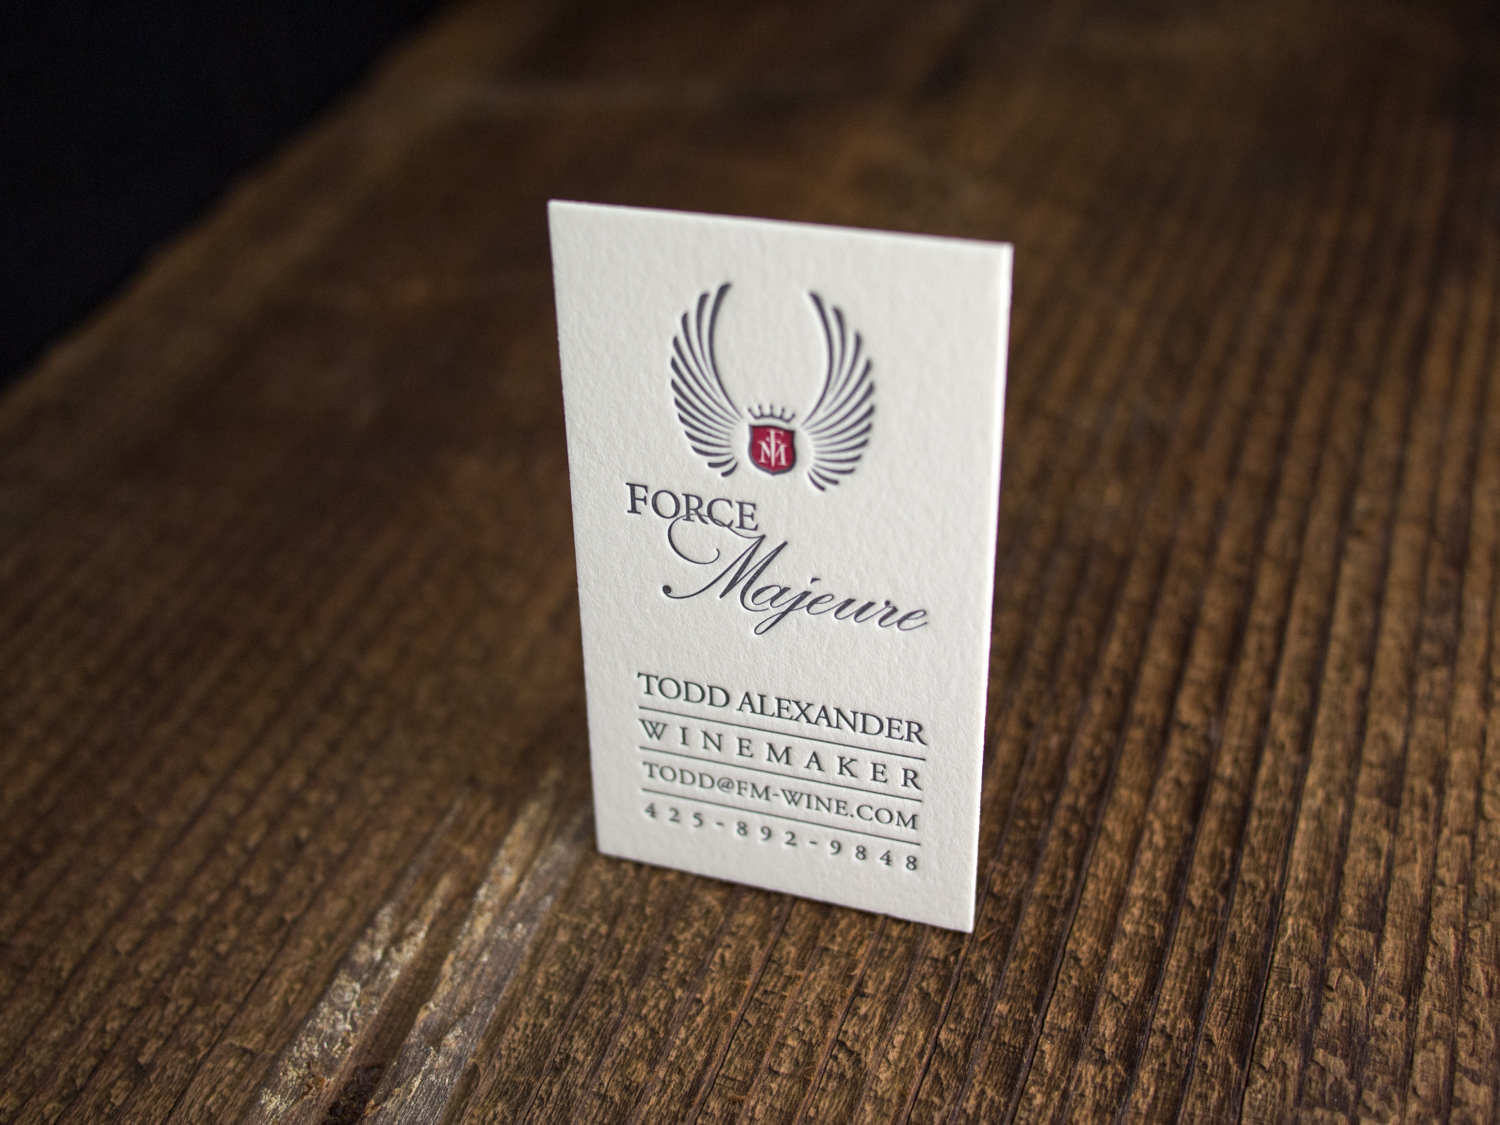 Winery Business Card